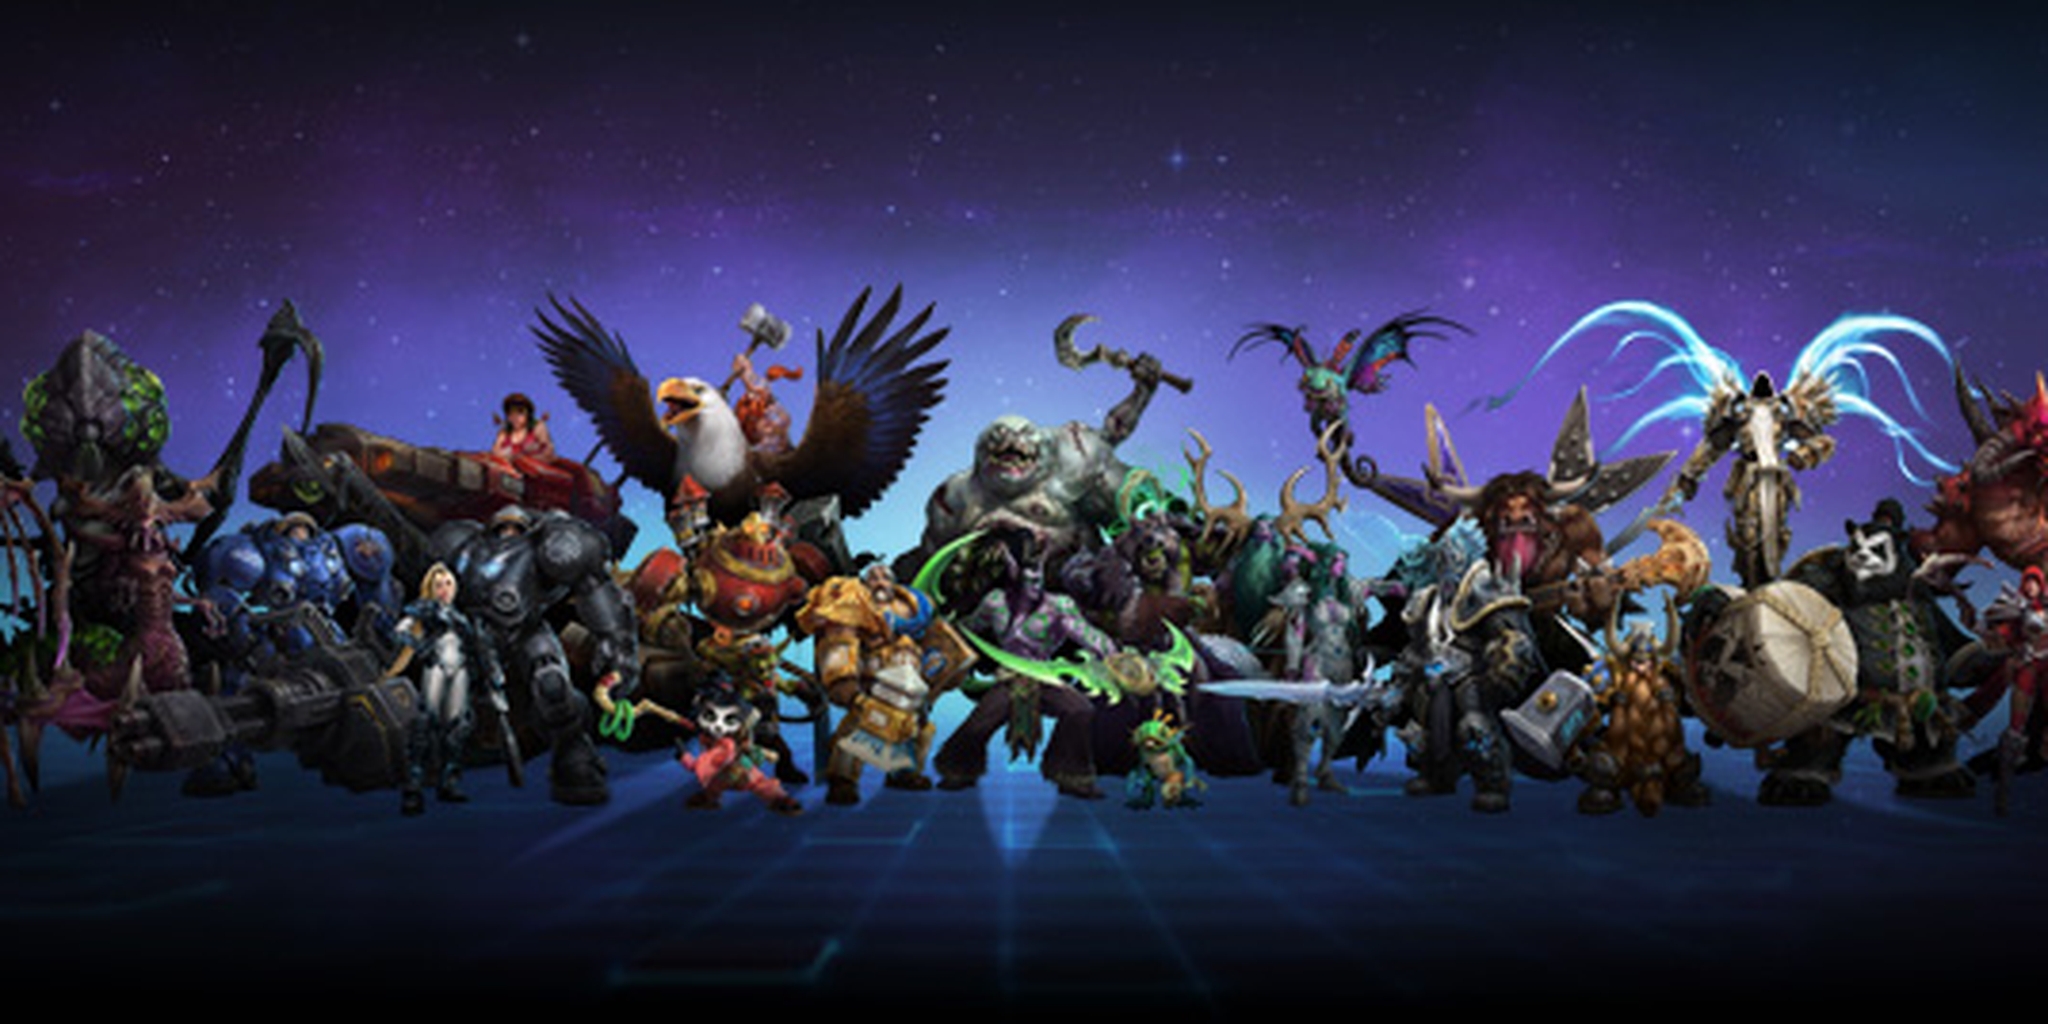 heroes of the storm 2.0 new skins